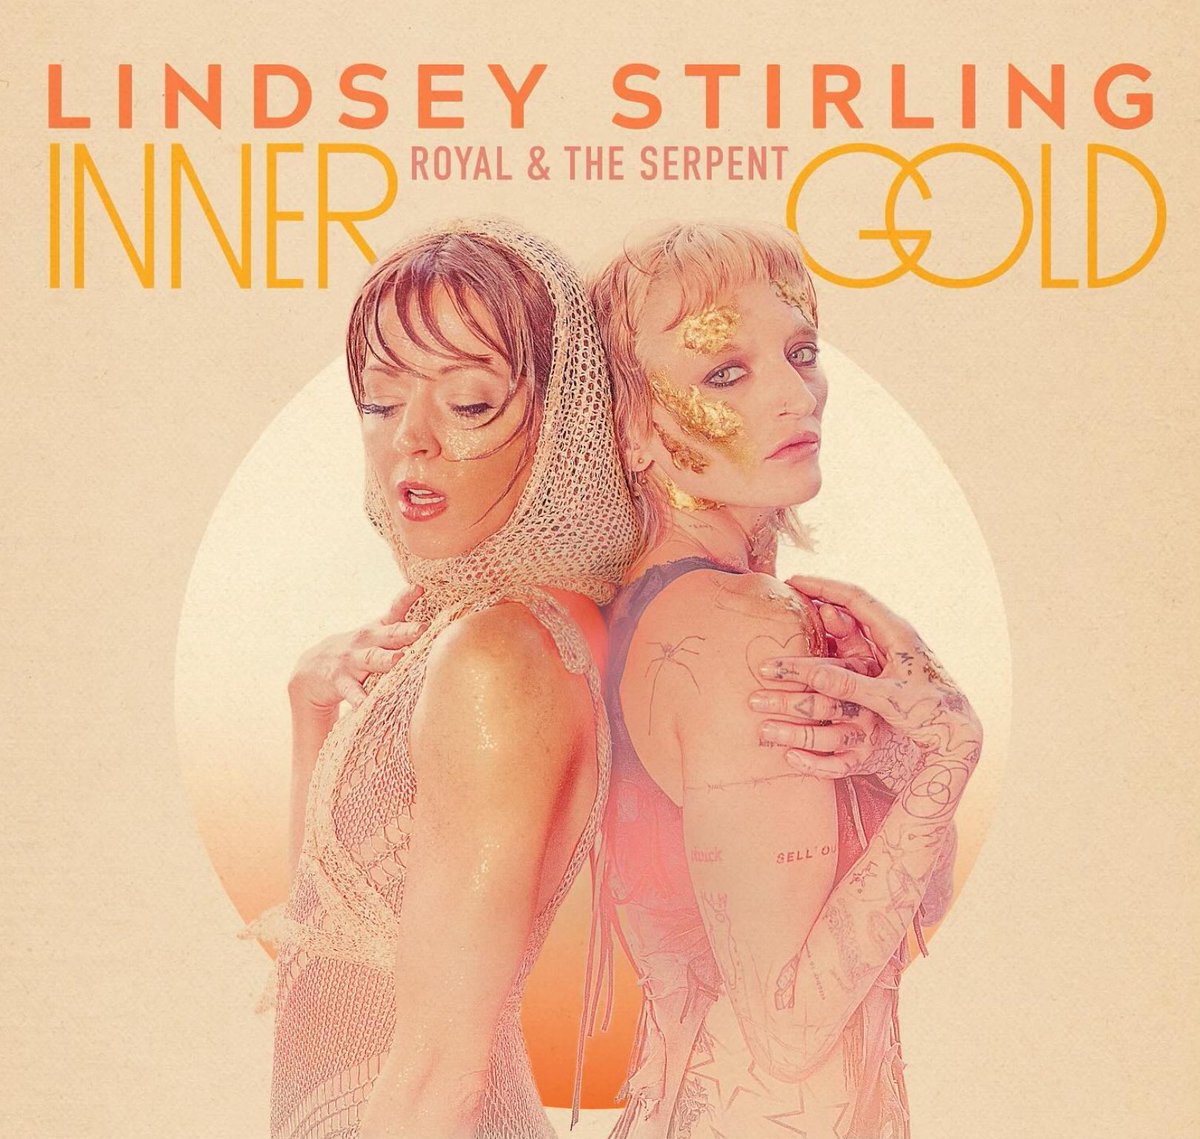 Less than 24 hours until @LindseyStirling and @royalandtheserp ’s music video #InnerGold comes out! Ready guys?! 😃